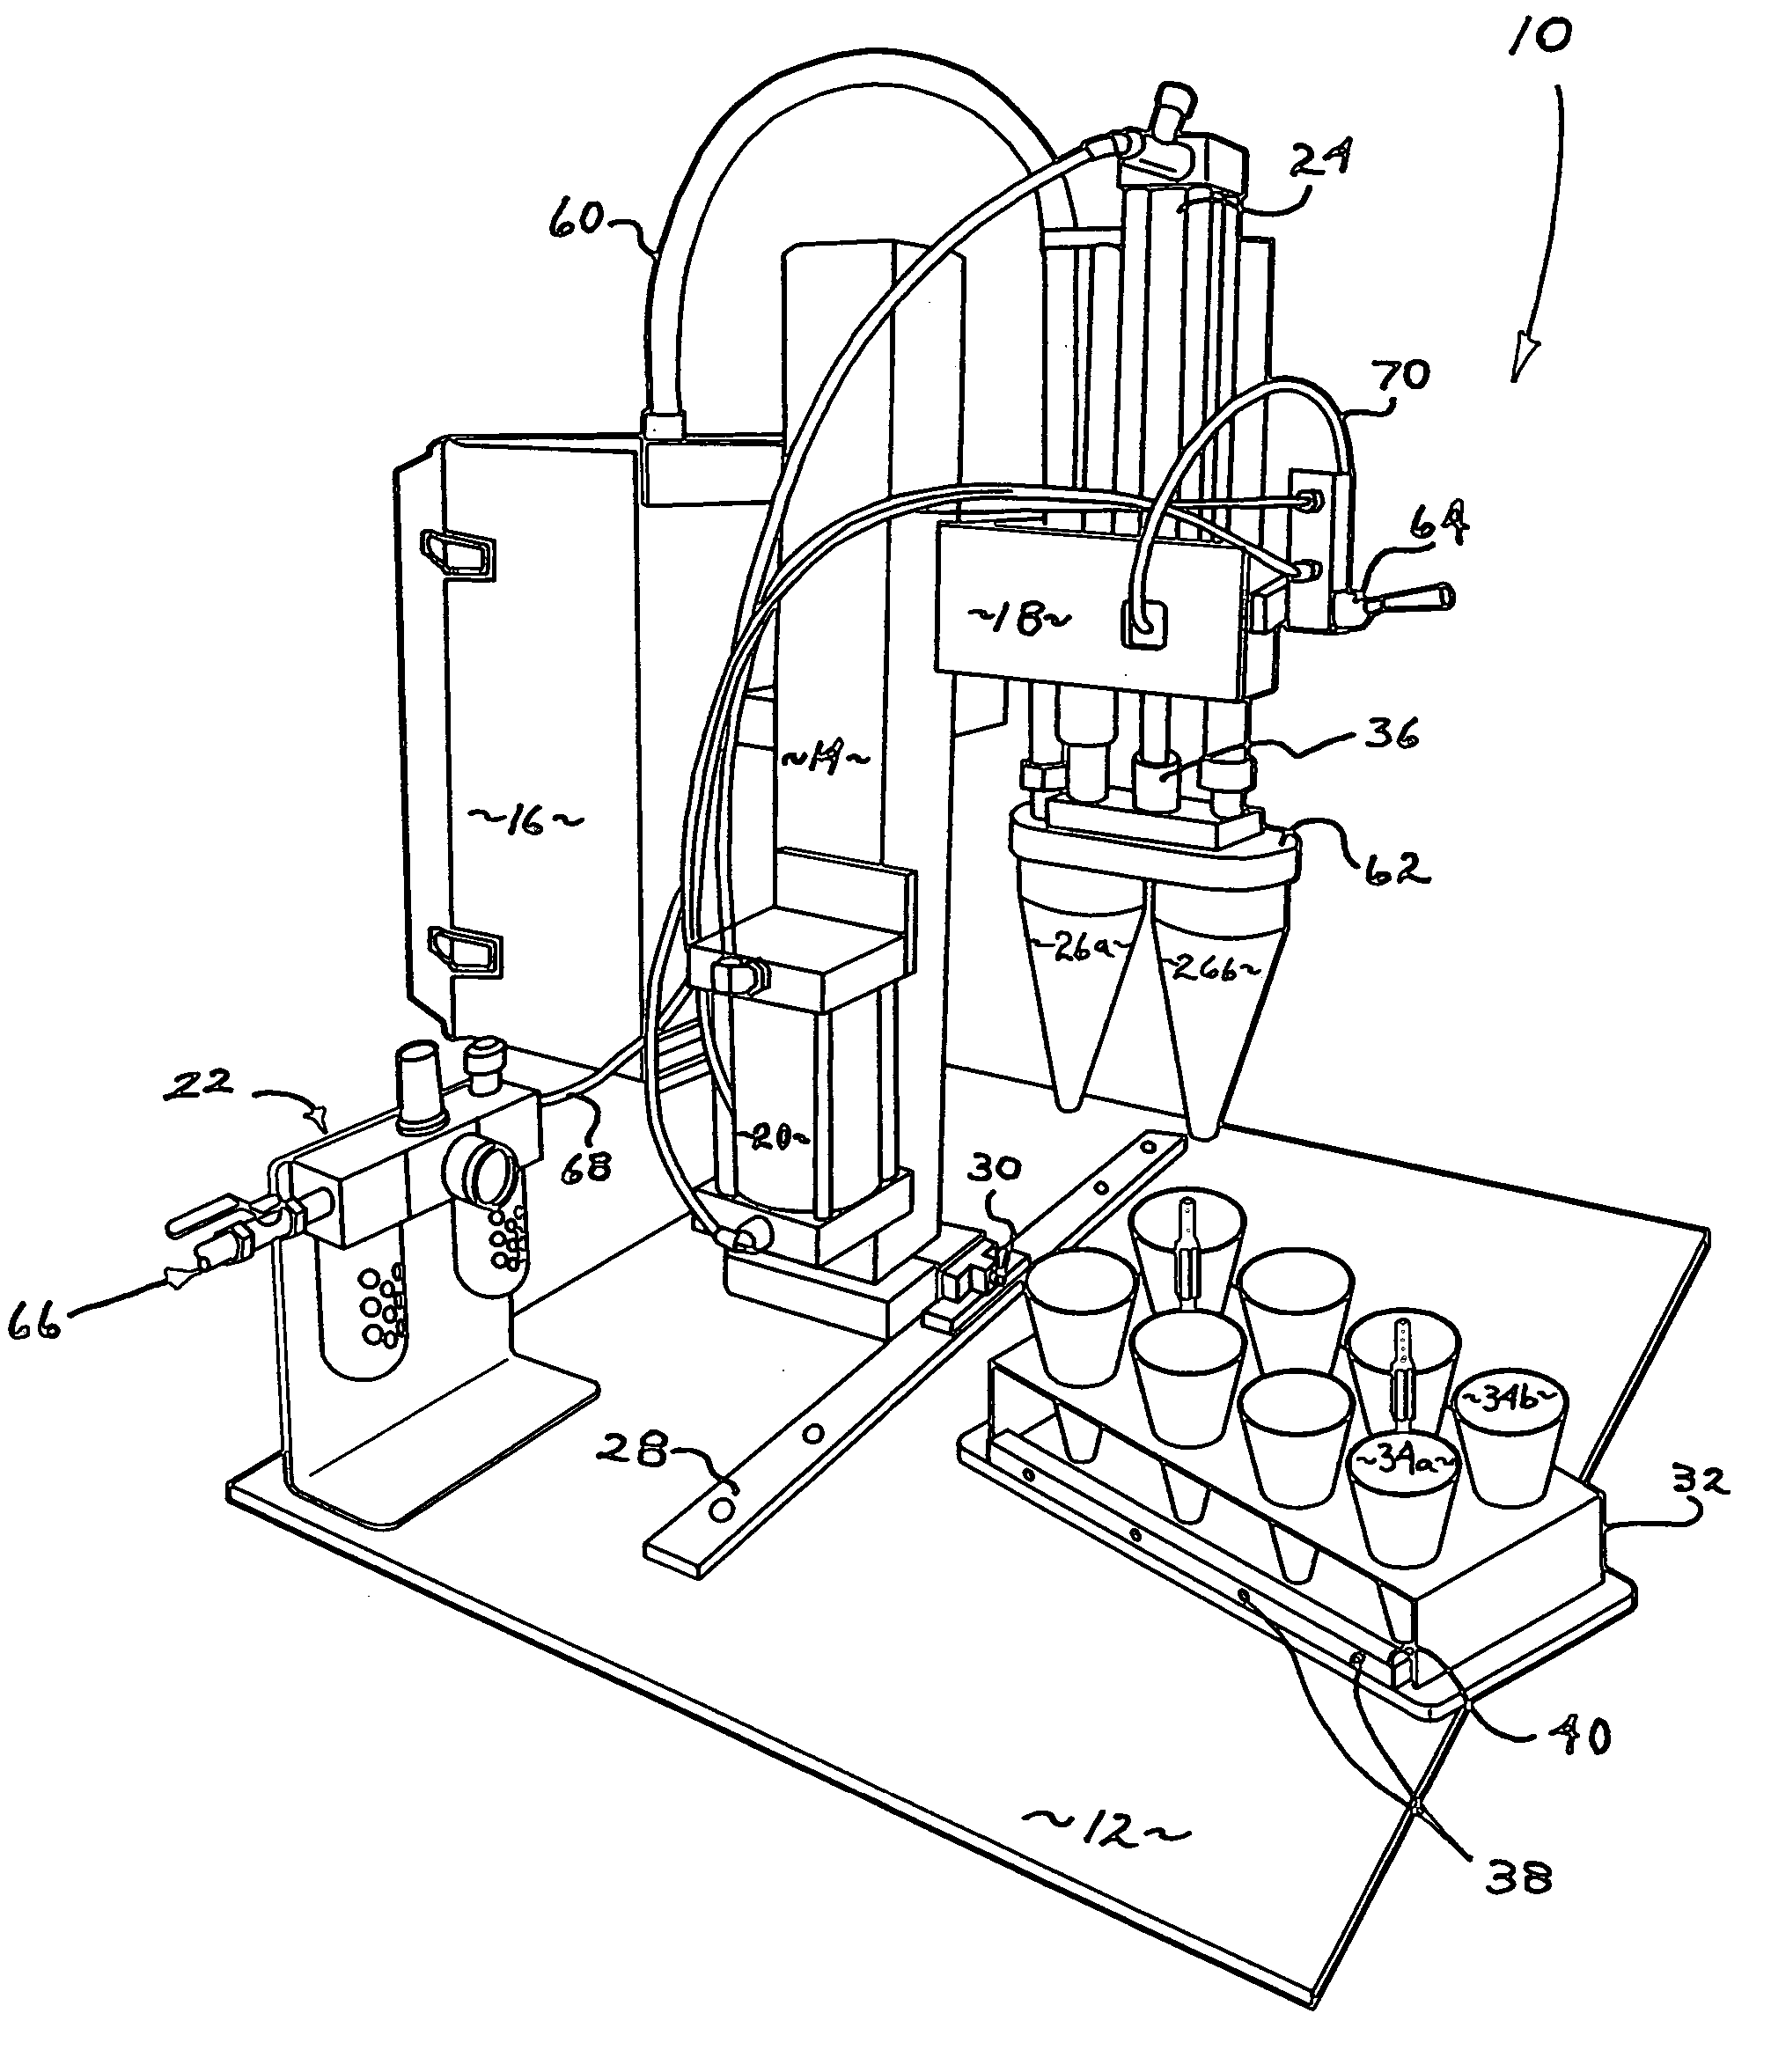 Edible container apparatus and method of manufacture